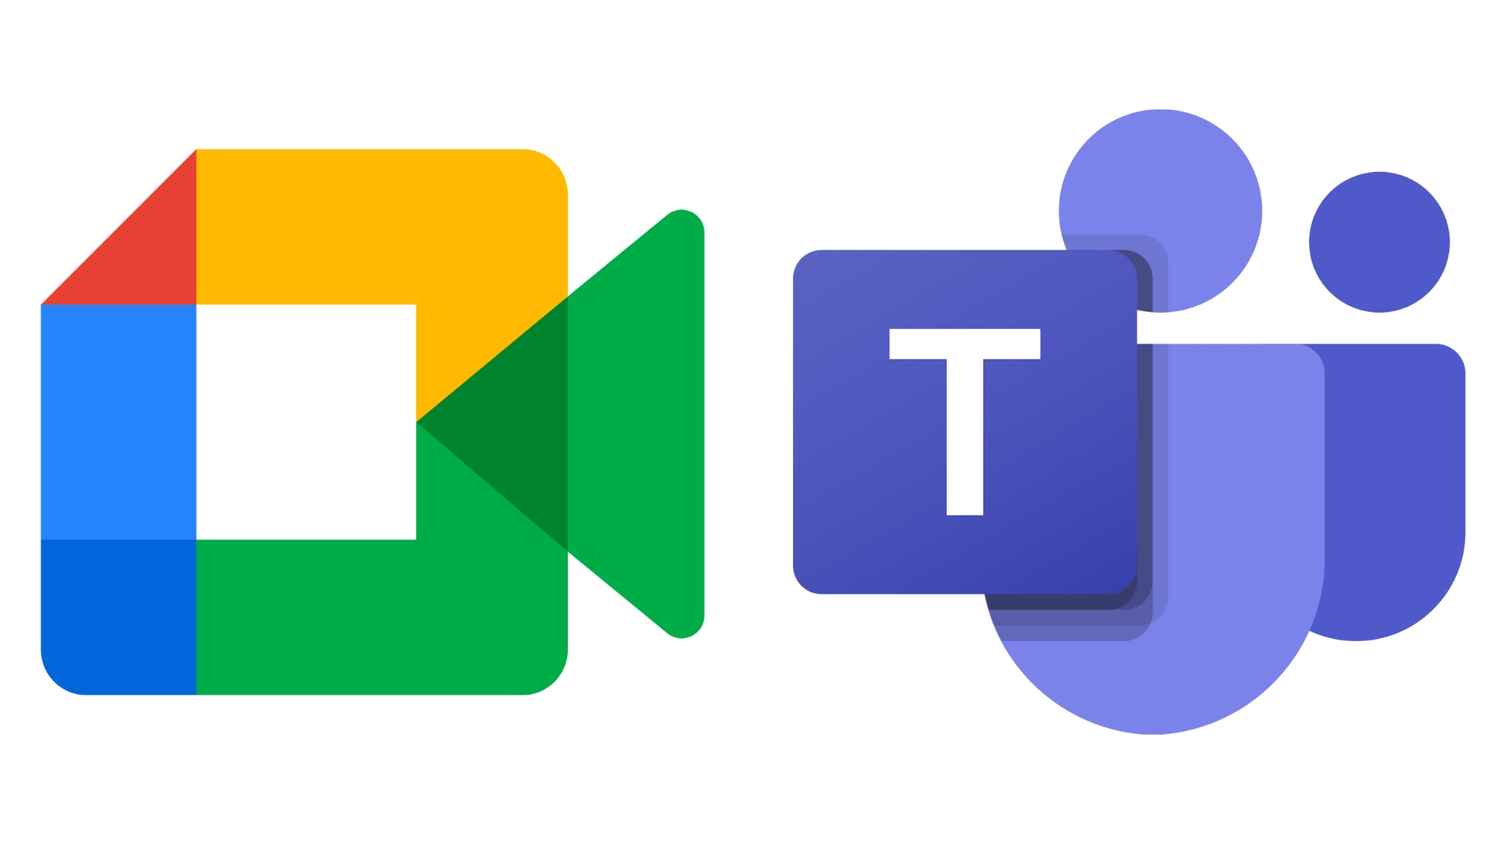 Google Meet vs Microsoft Teams: Which is best for video conferencing?